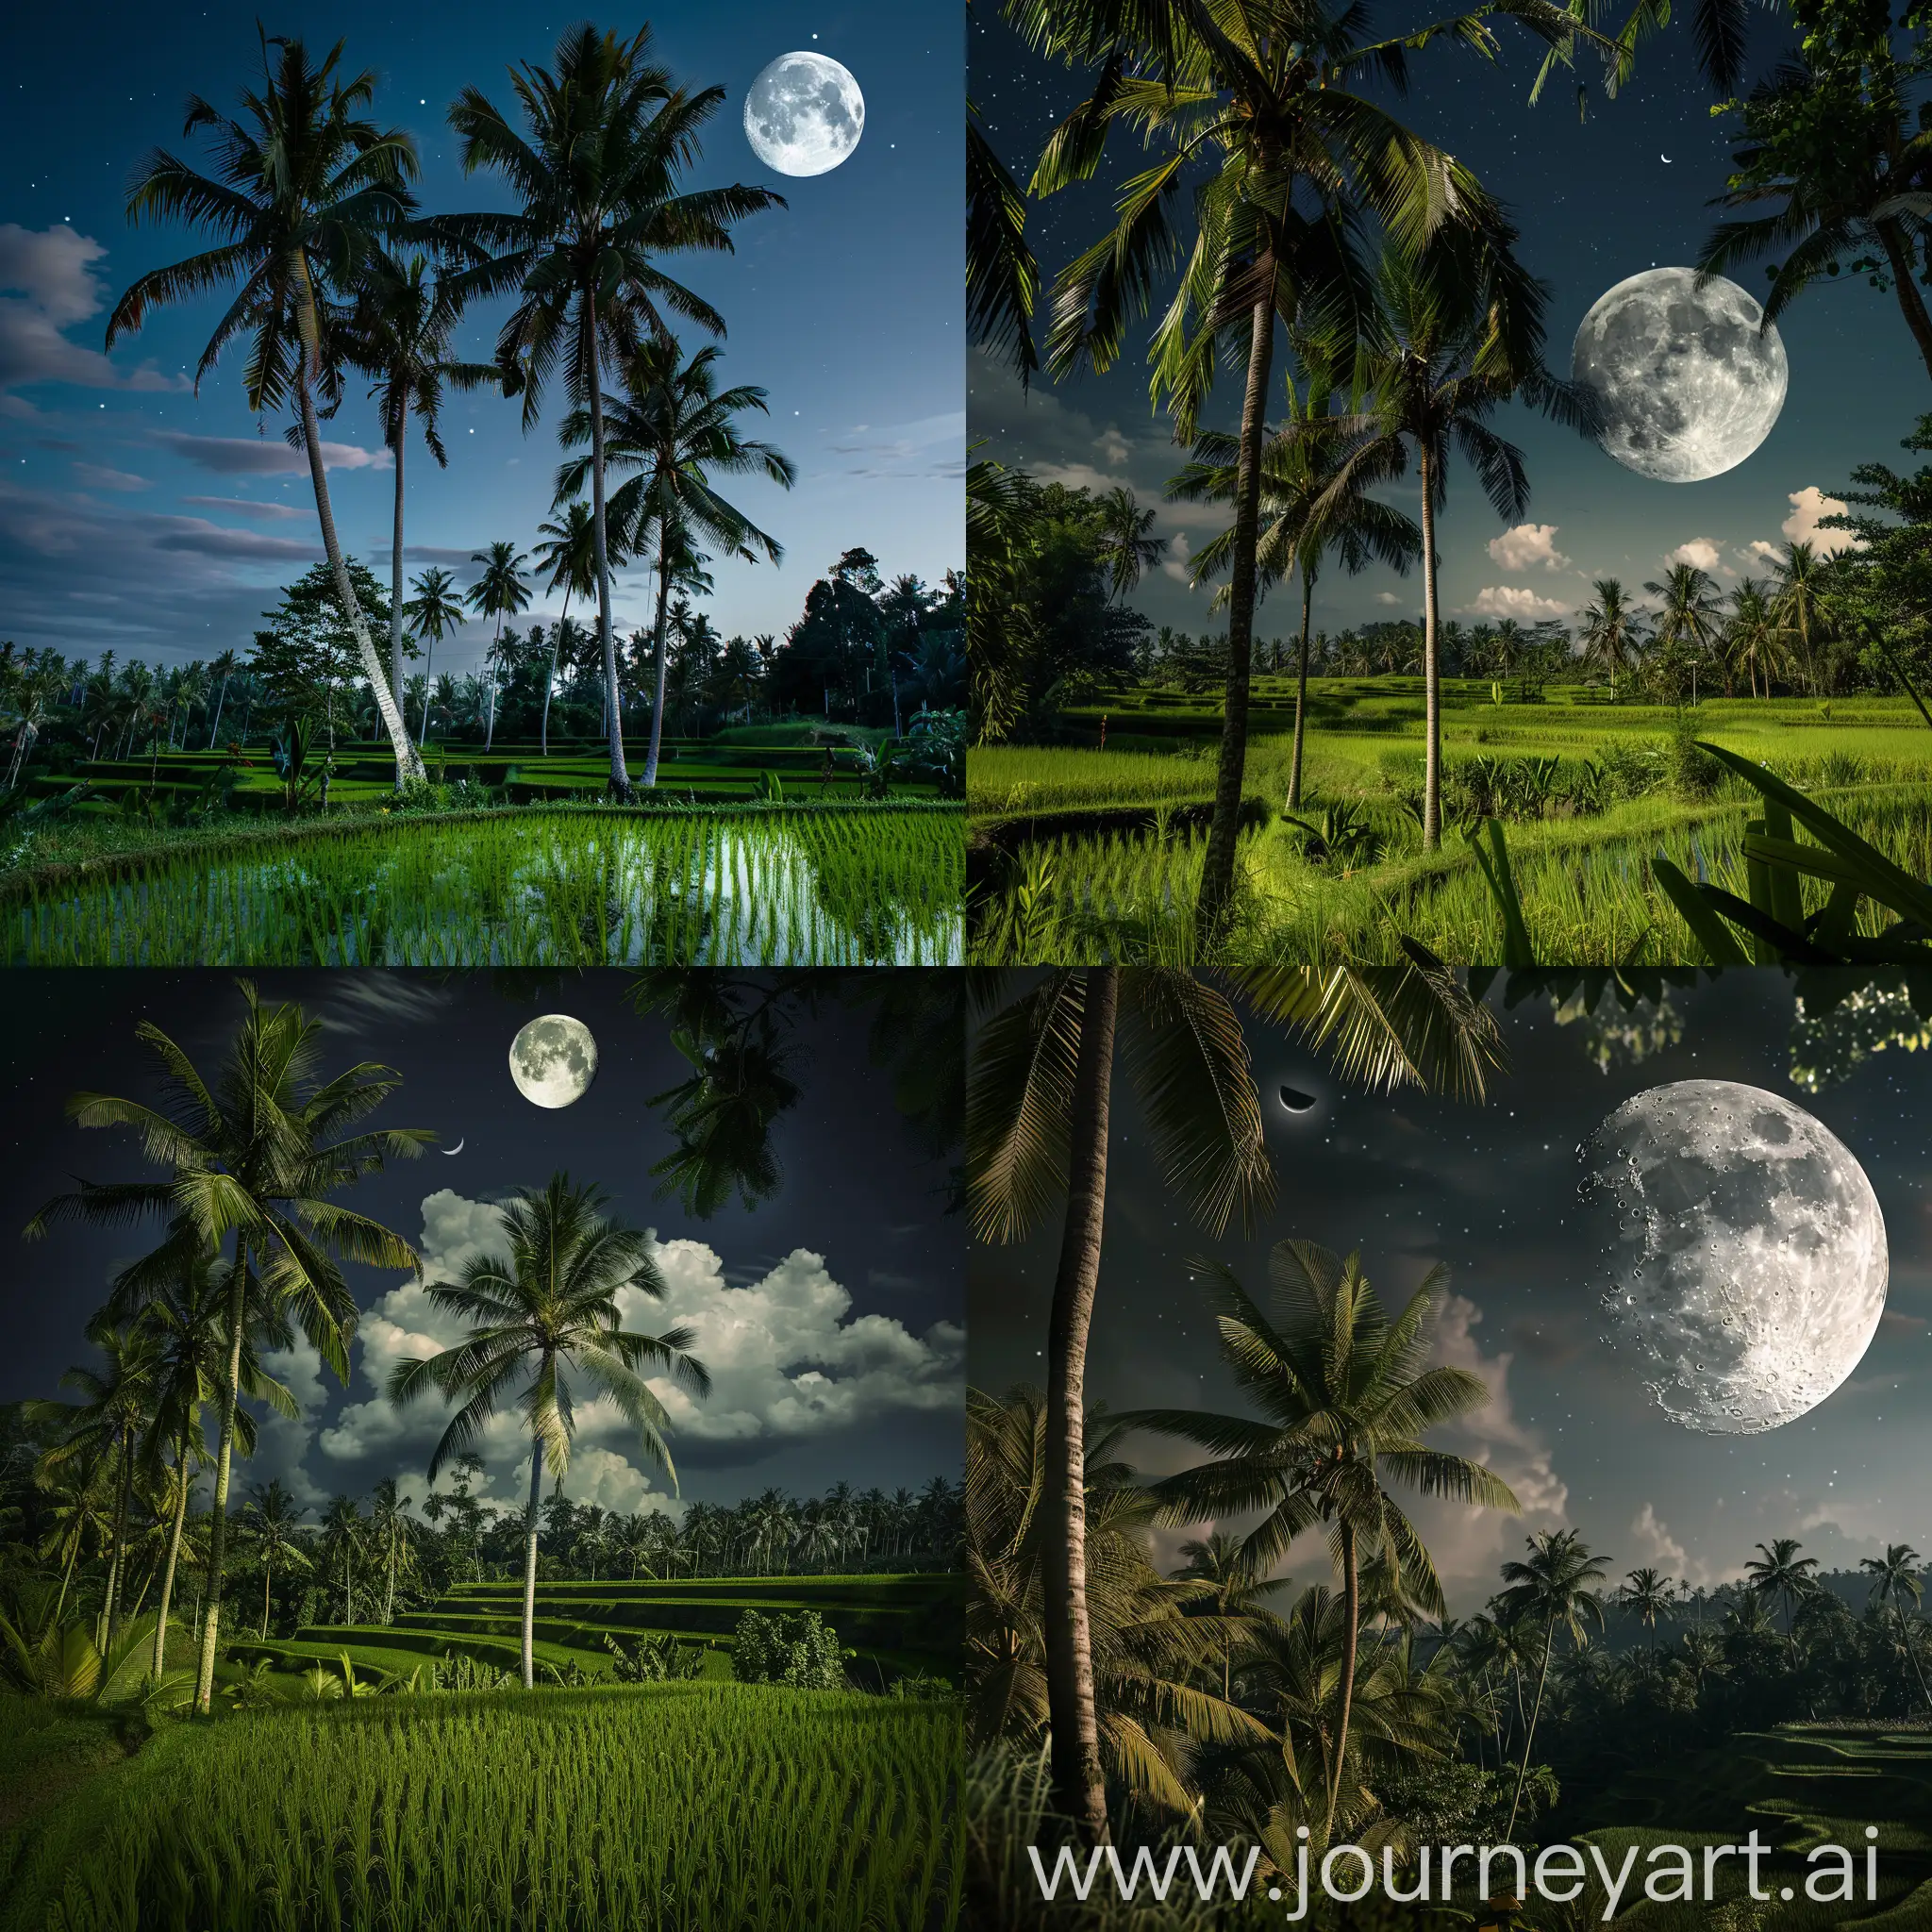 Moonlit-Rice-Fields-with-Coconut-Trees-at-Night